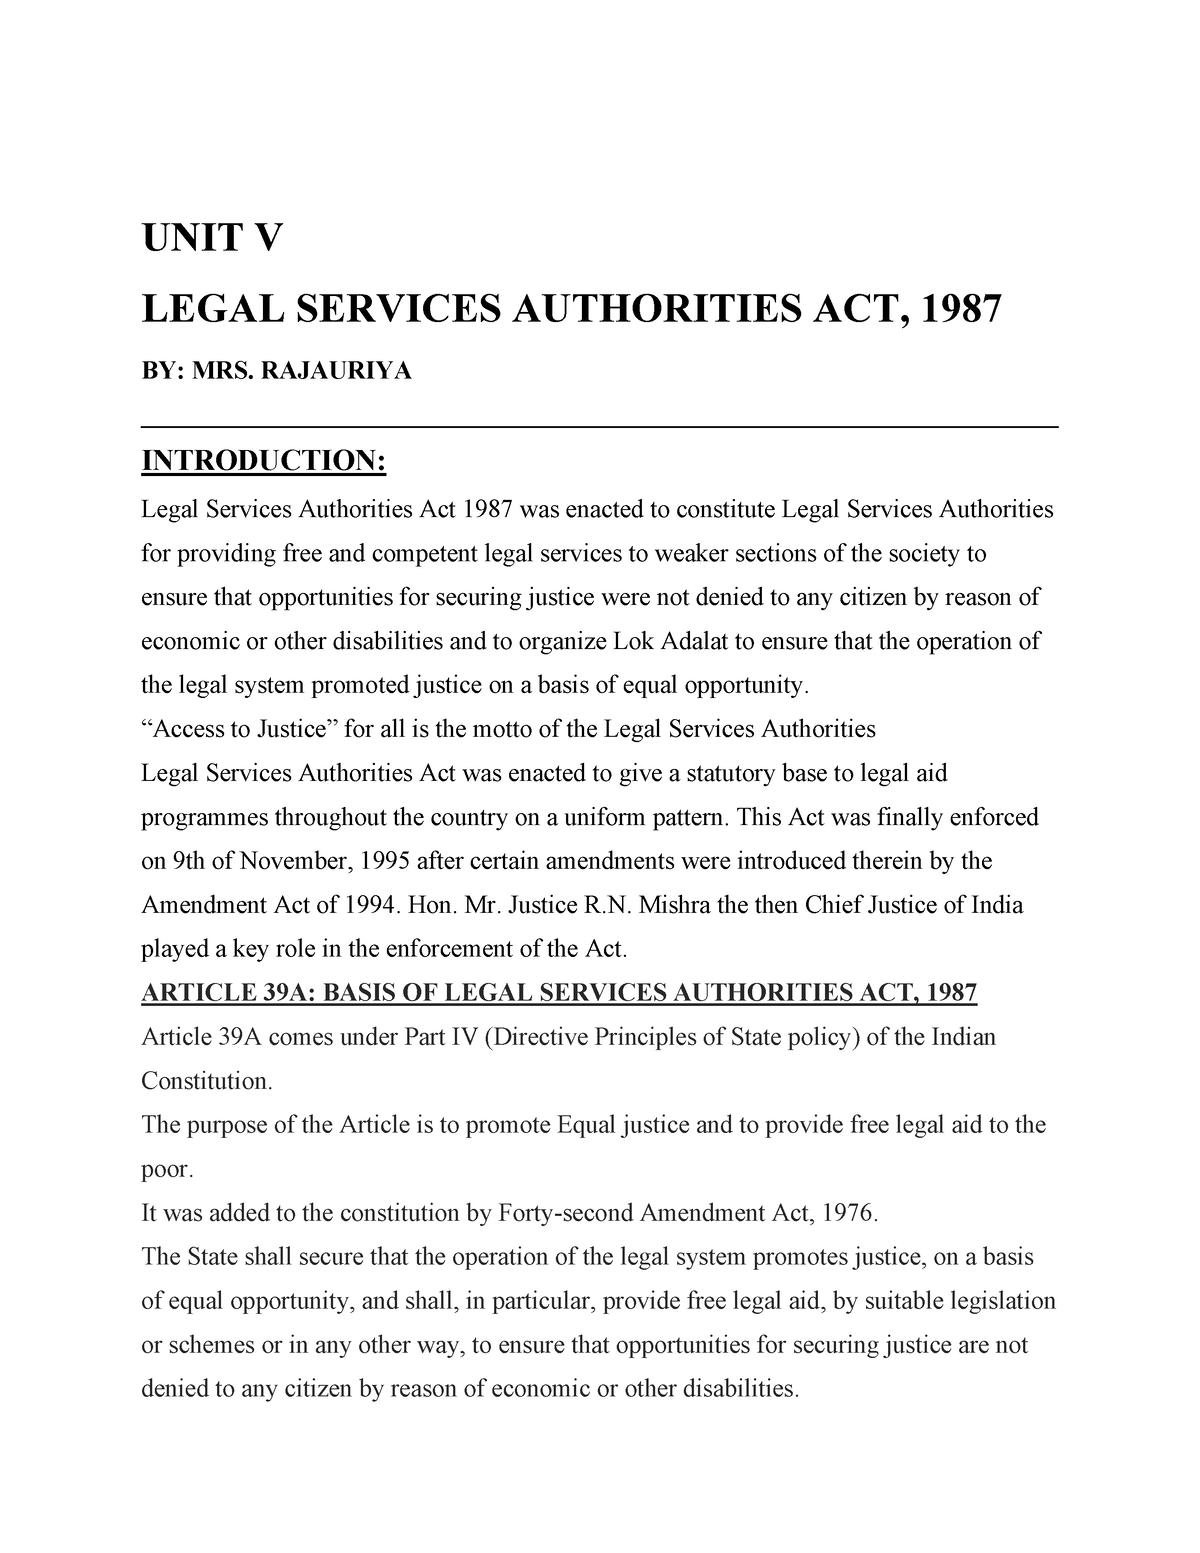 essay on legal services authorities act 1987